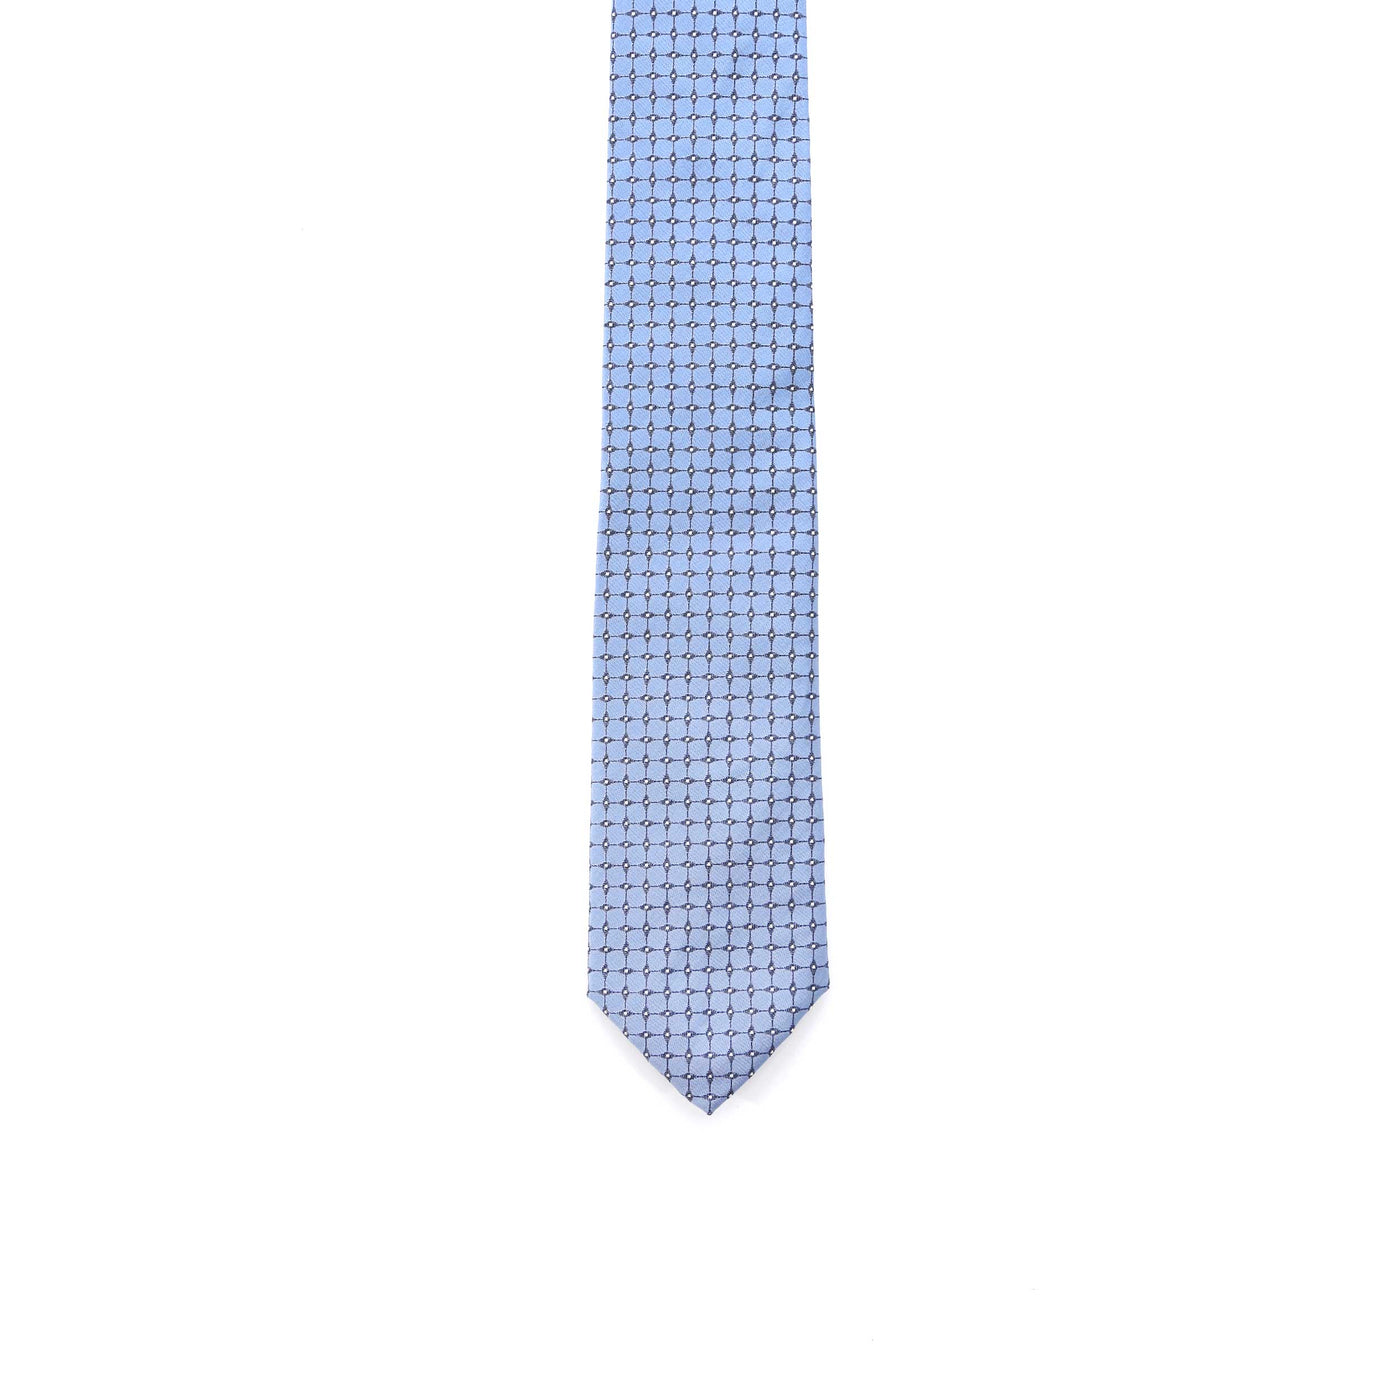 BOSS H Tie 7.5cm Tie in Blue Squares with Dot